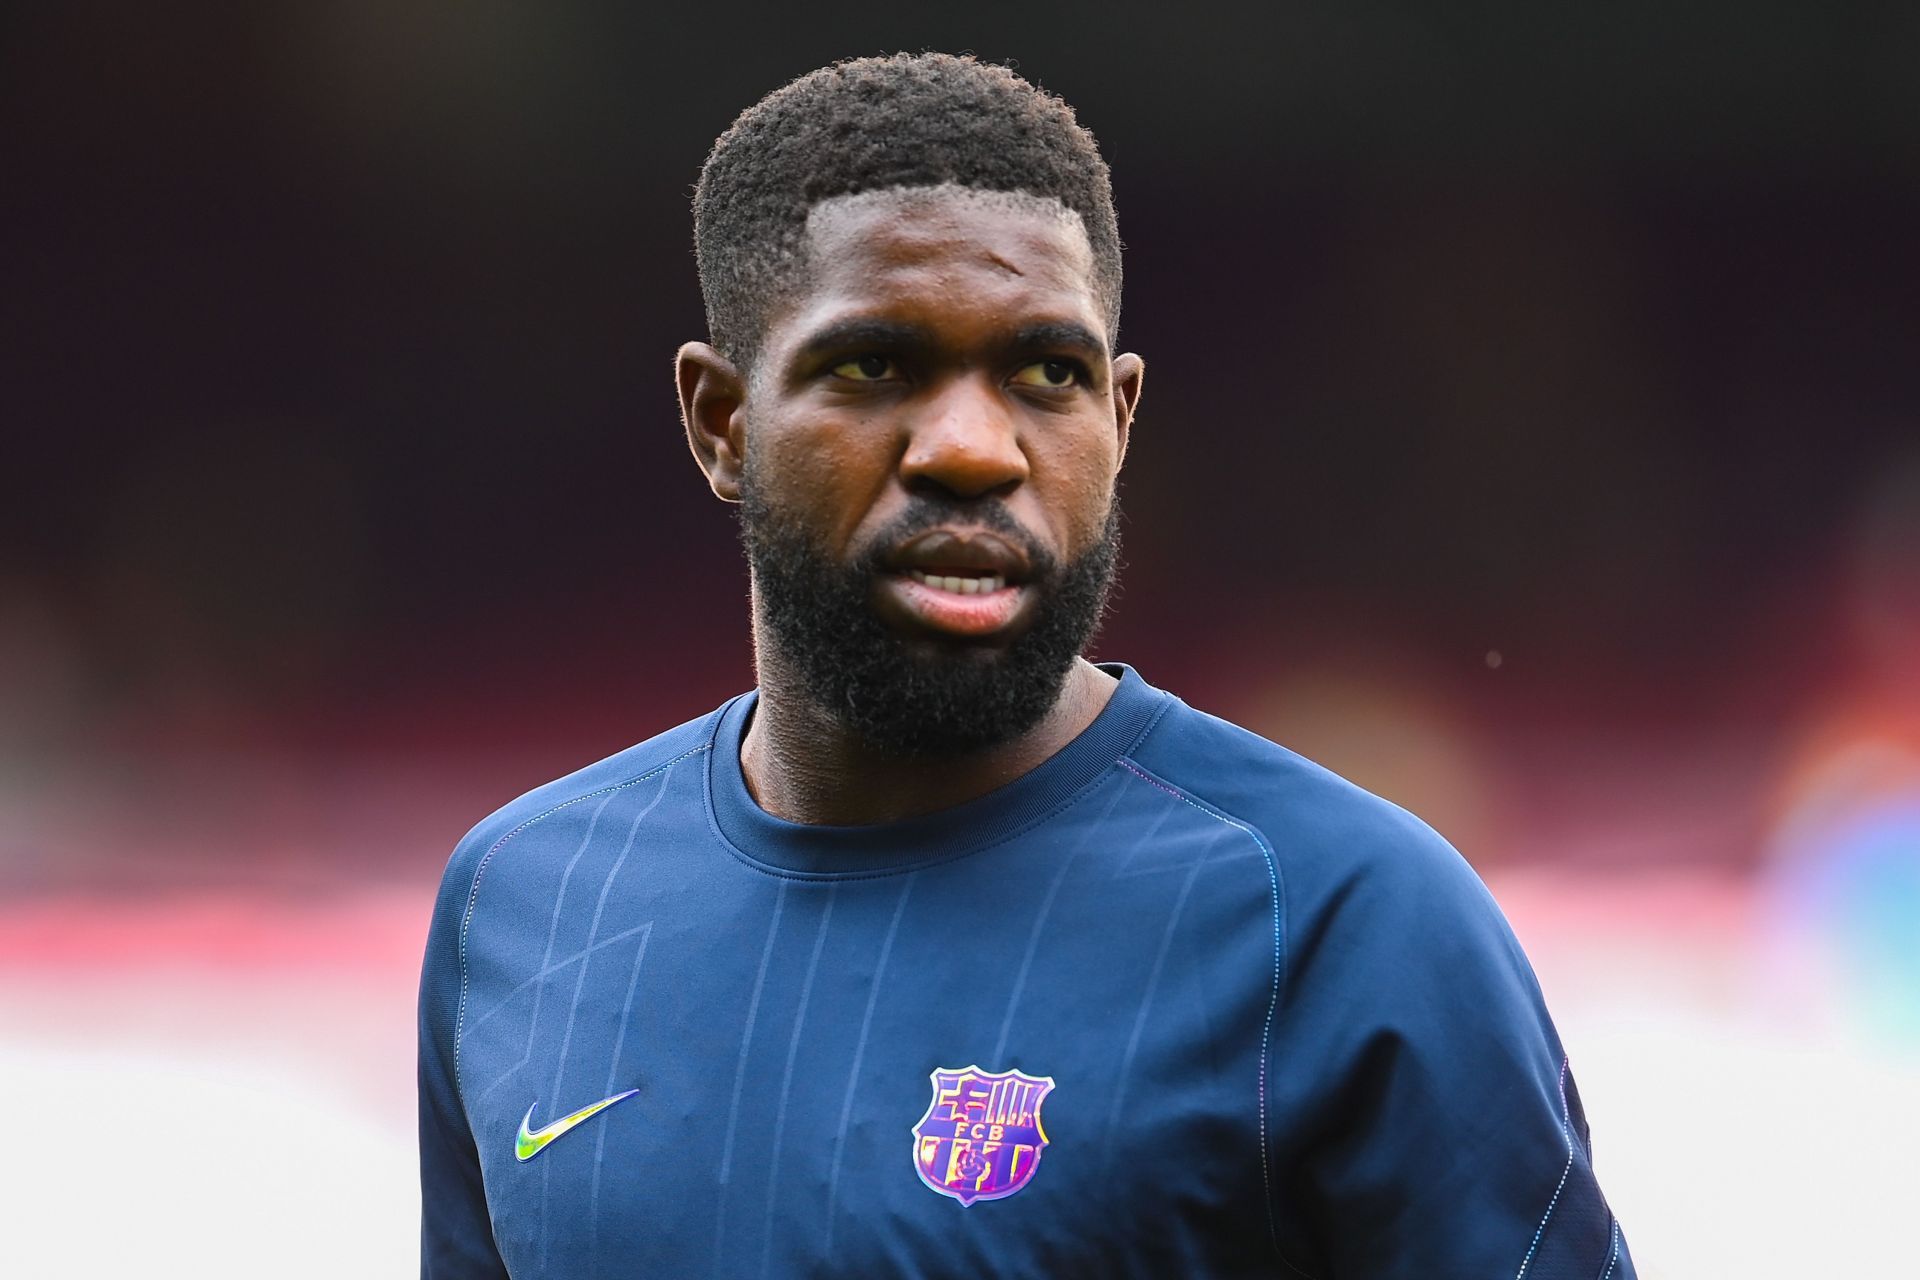 Samuel Umtiti could leave the Catalan club this summer